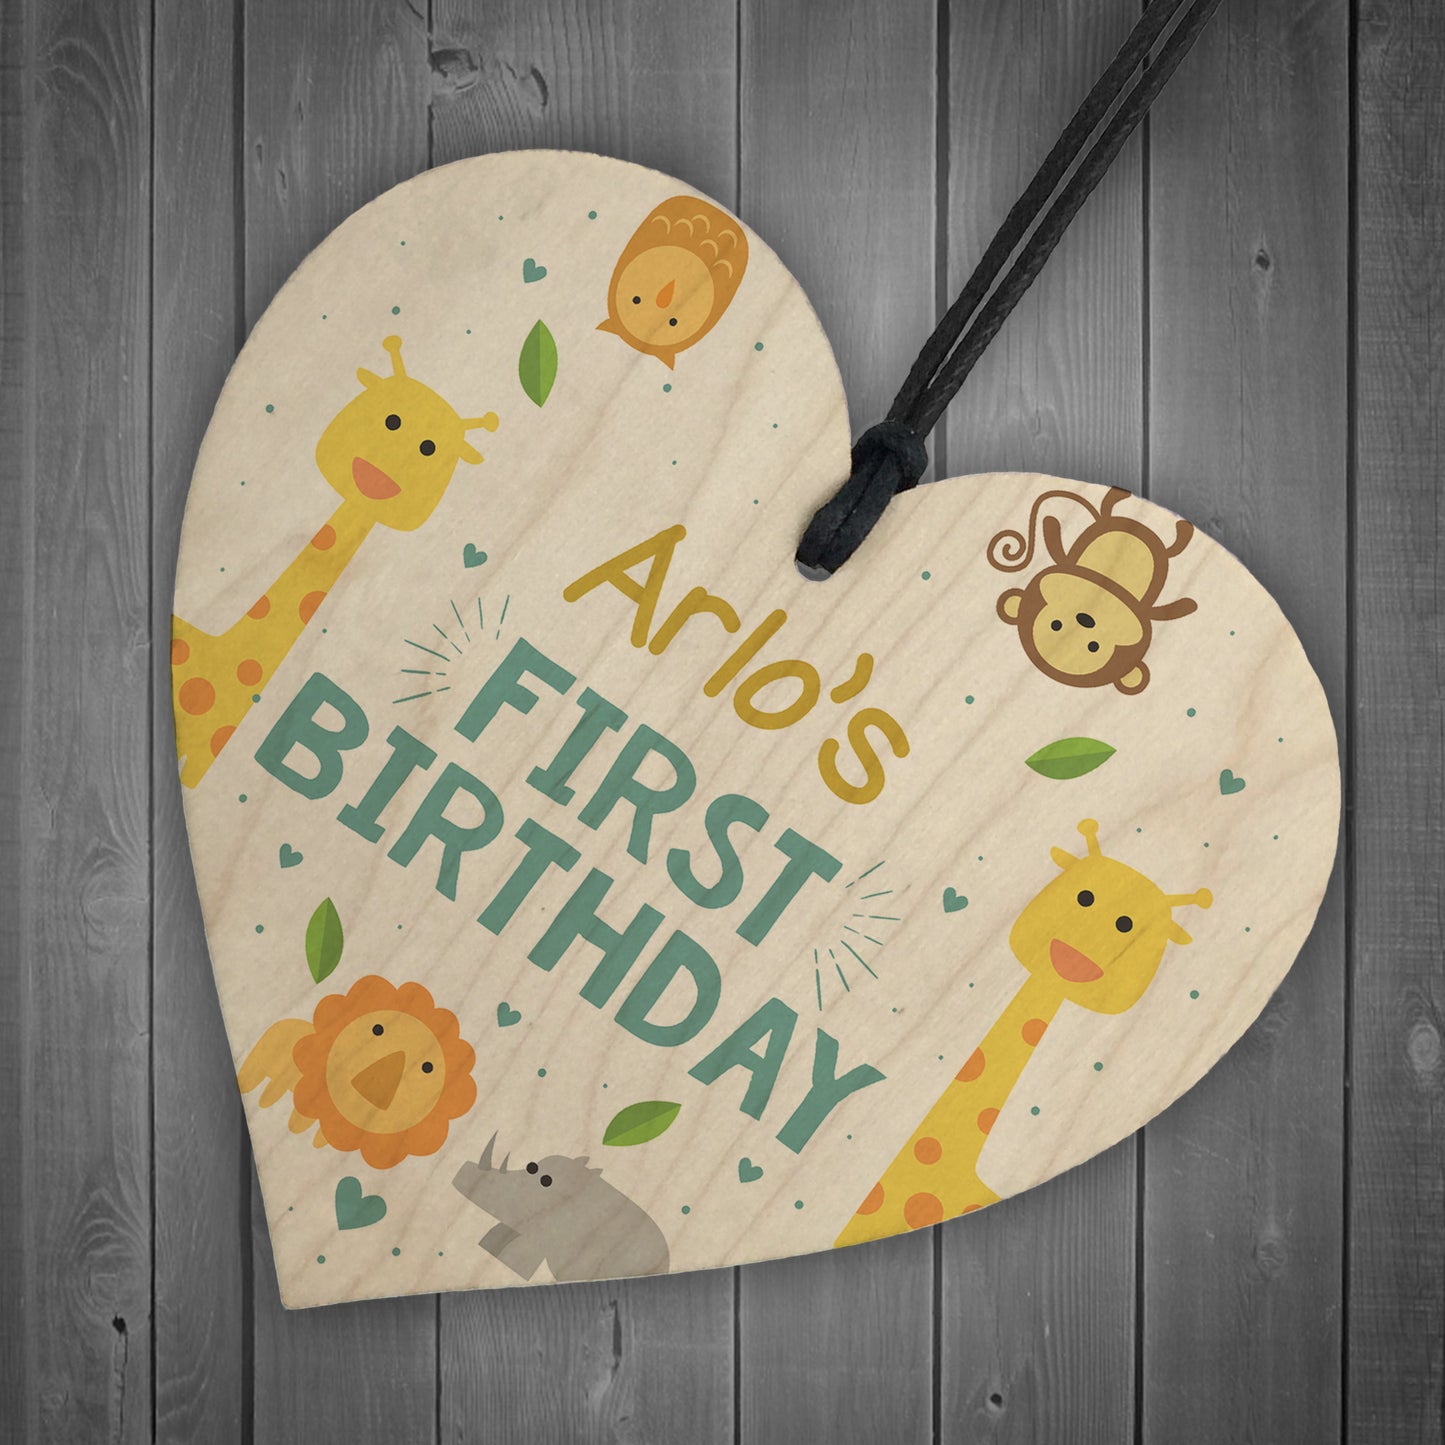 Personalised 1st Birthday Gift For Daughter Son Wooden Heart